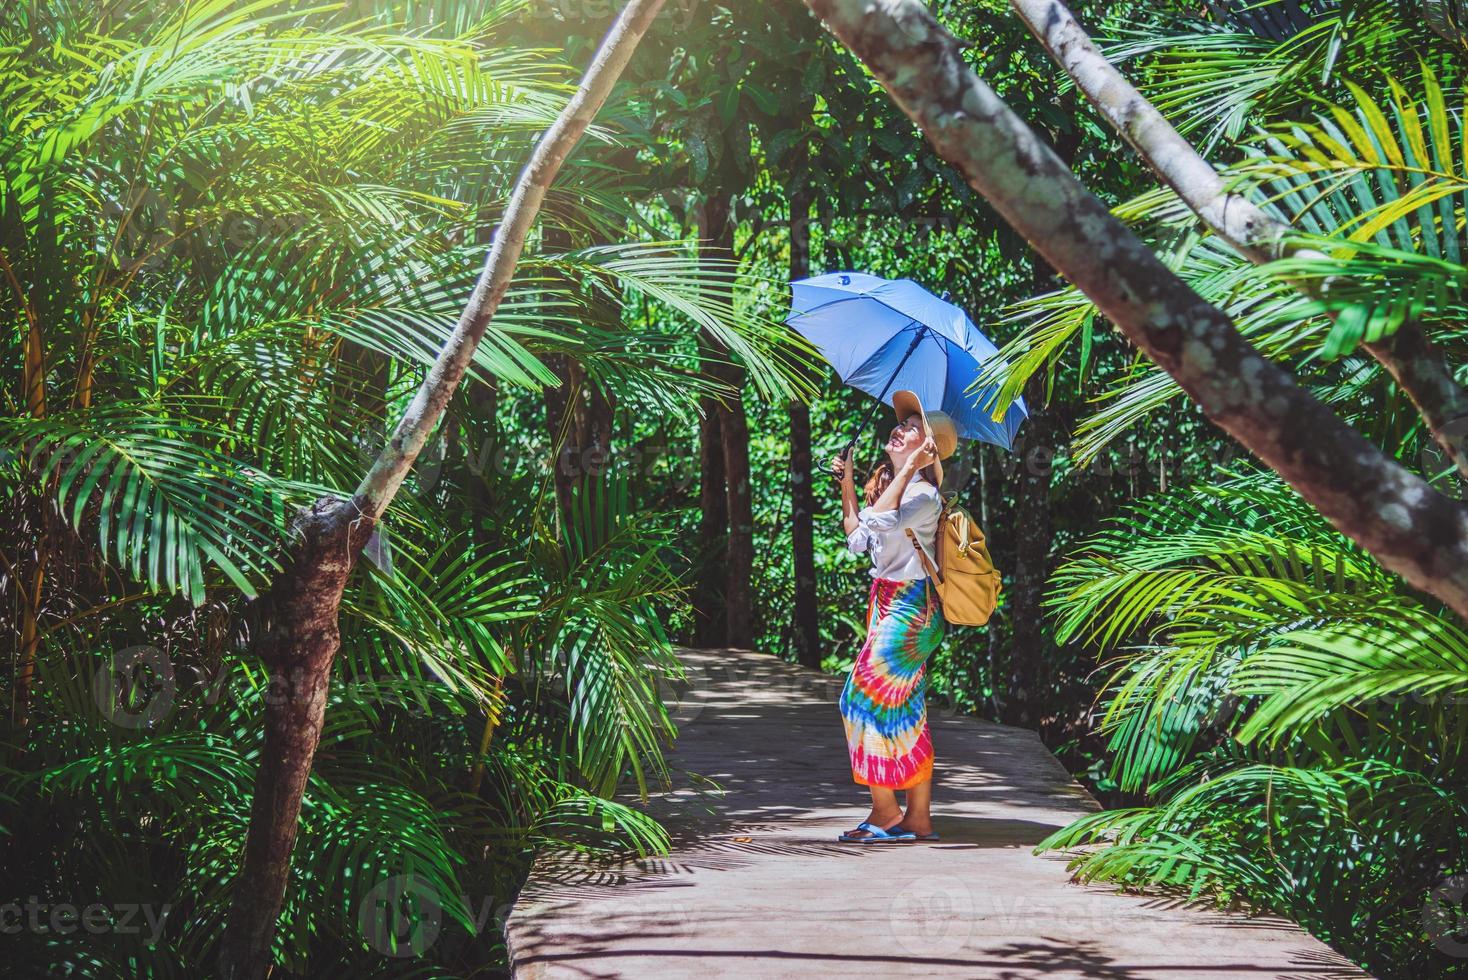 Asian women travel relax travel nature in the holiday. Nature Study in the forest. Girl happy walking smiling and enjoying travel through the mangrove forest. tha pom-klong-song-nam at krabi. summer photo